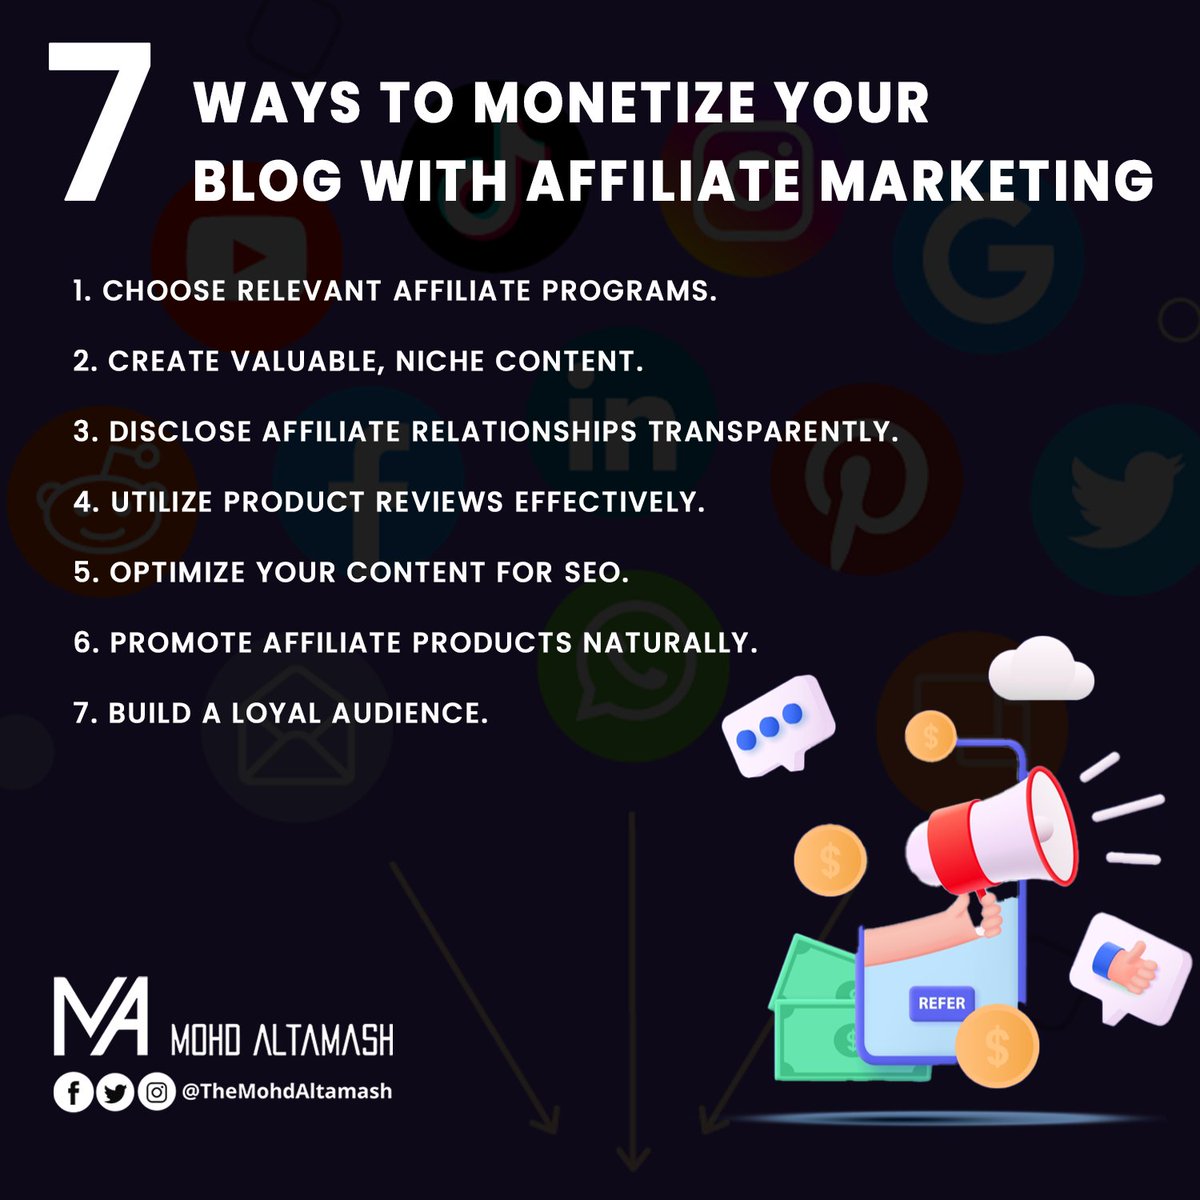 Unlock the potential of your blog! Learn how to monetize through affiliate marketing and turn your passion into profits.

#BlogMonetization #AffiliateMarketingTips #PassionToProfits